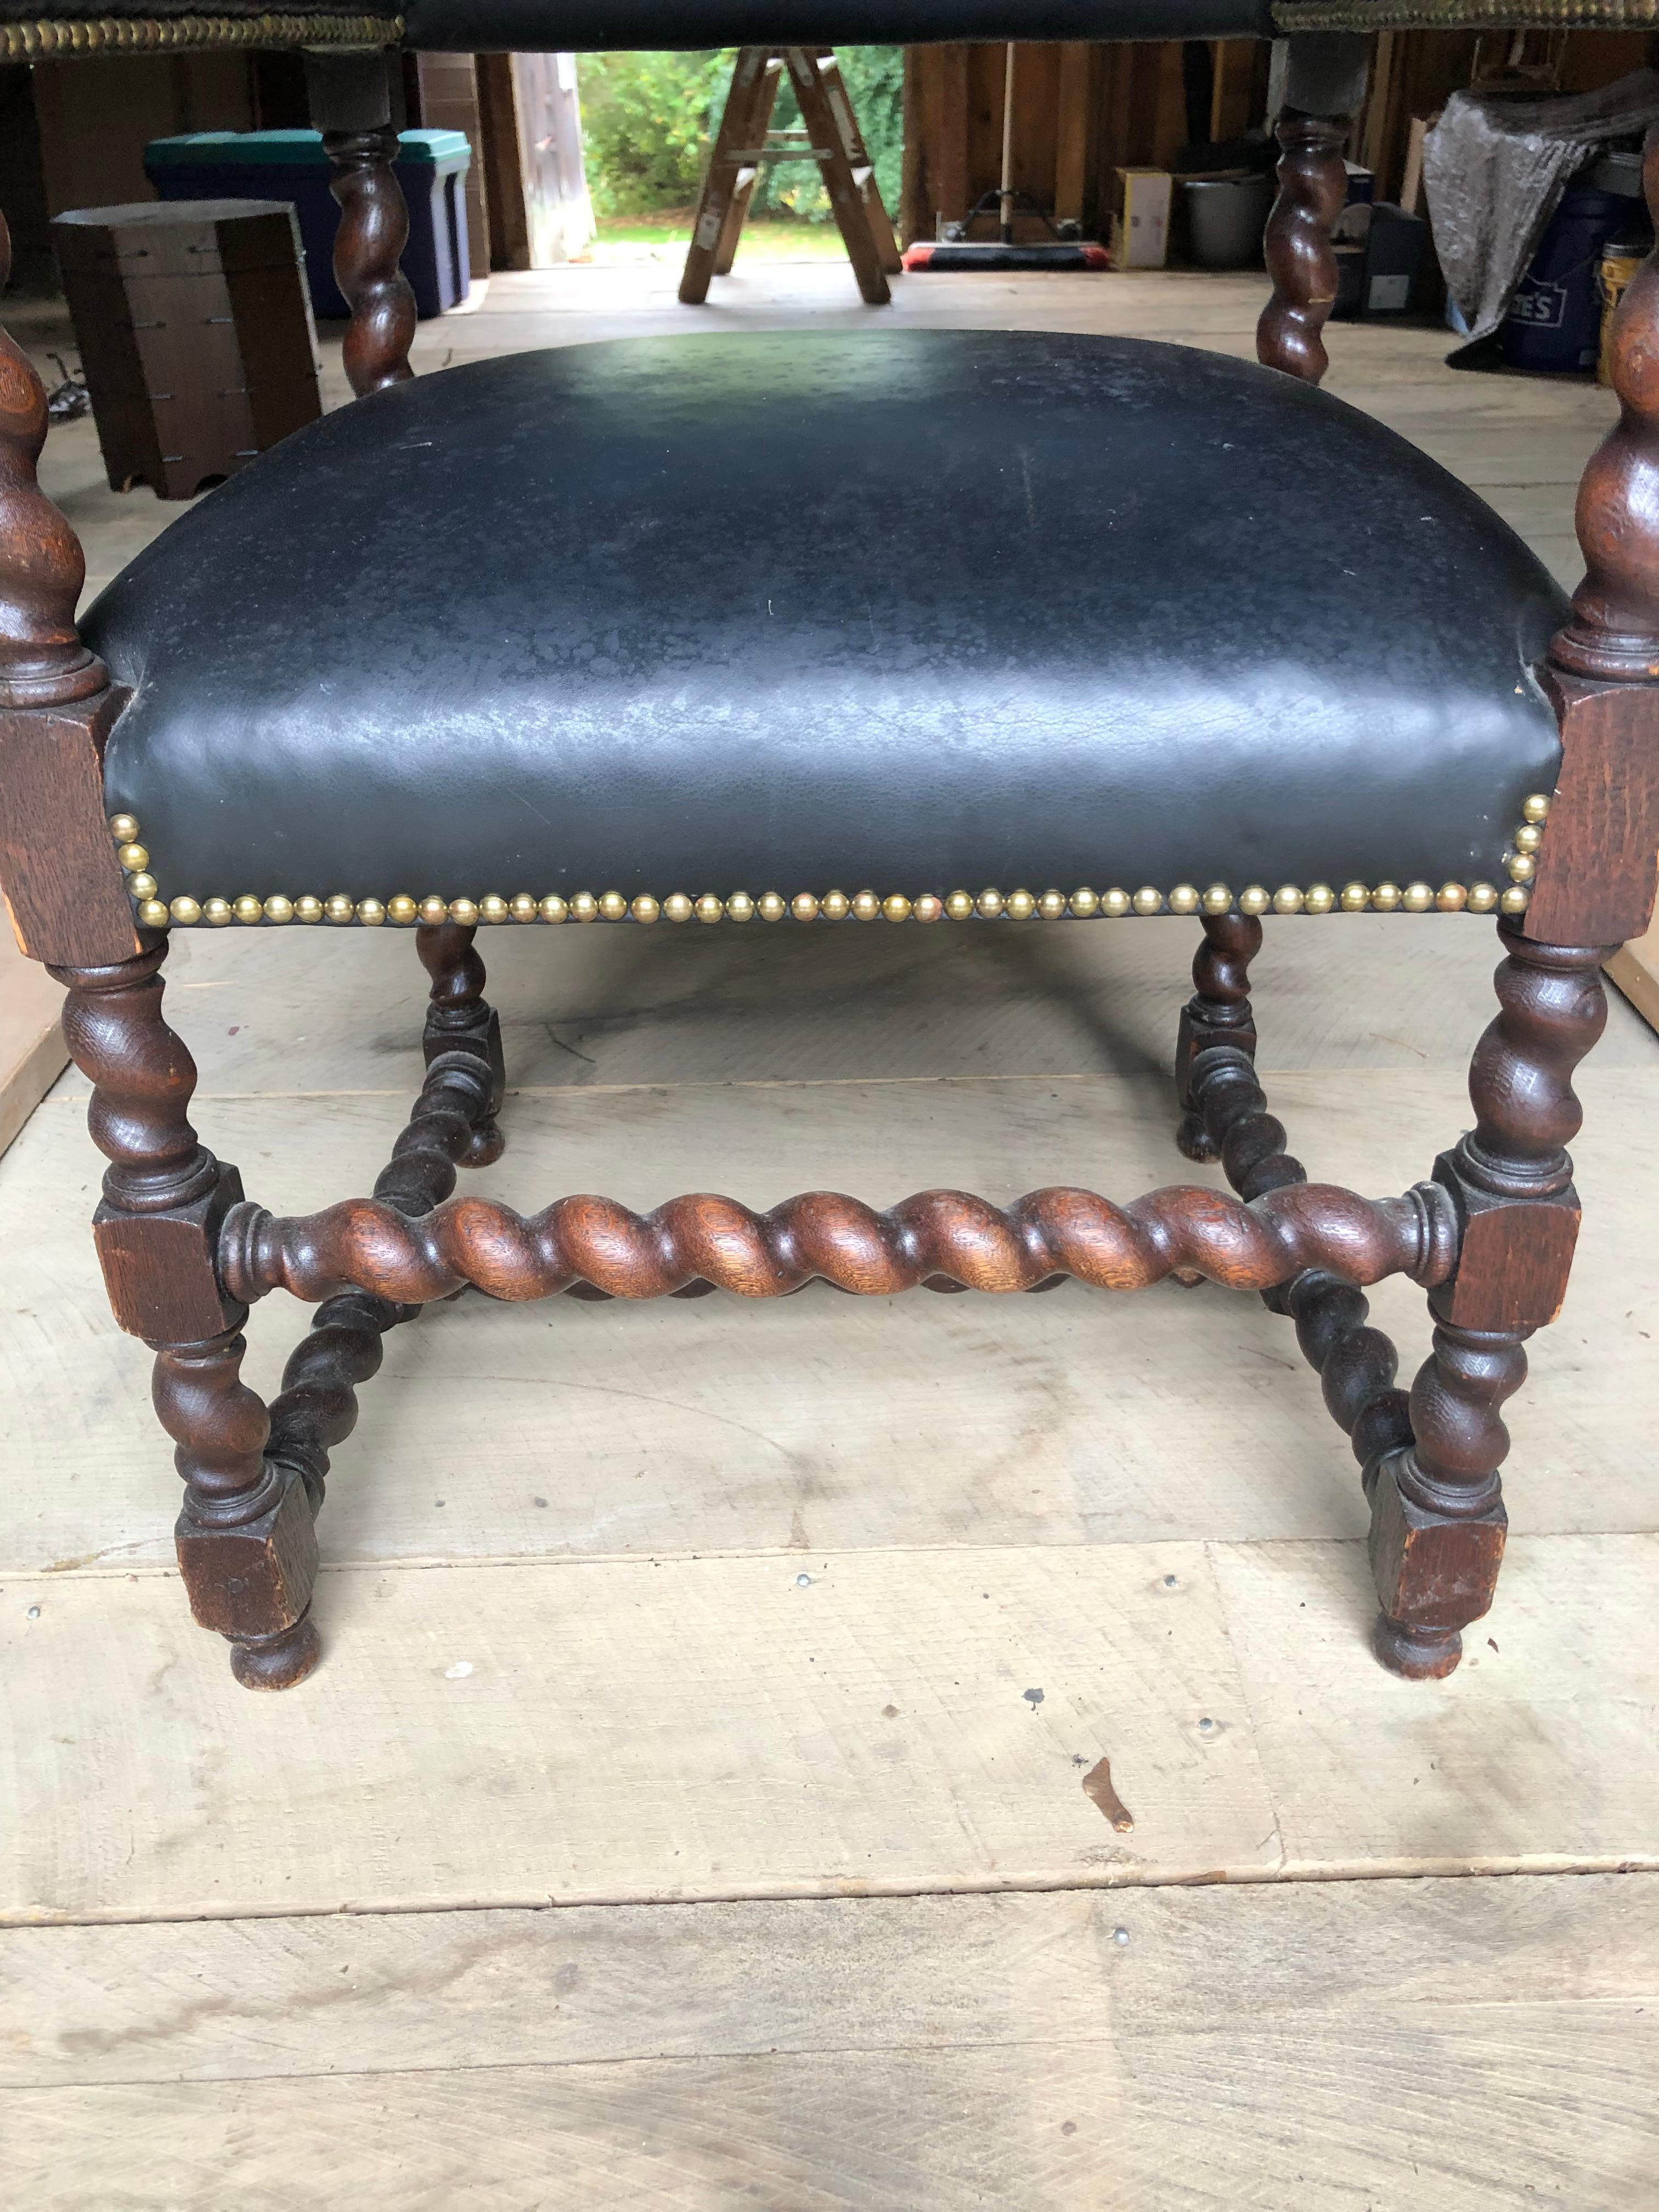 Oversized handsome barley twist walnut throne shaped armchair upholstered in faux black leather.  Great looking from every angle.  Great bones but recommend reupholstery.  No rips or tears, just looks a bit tired.
Arm height 29